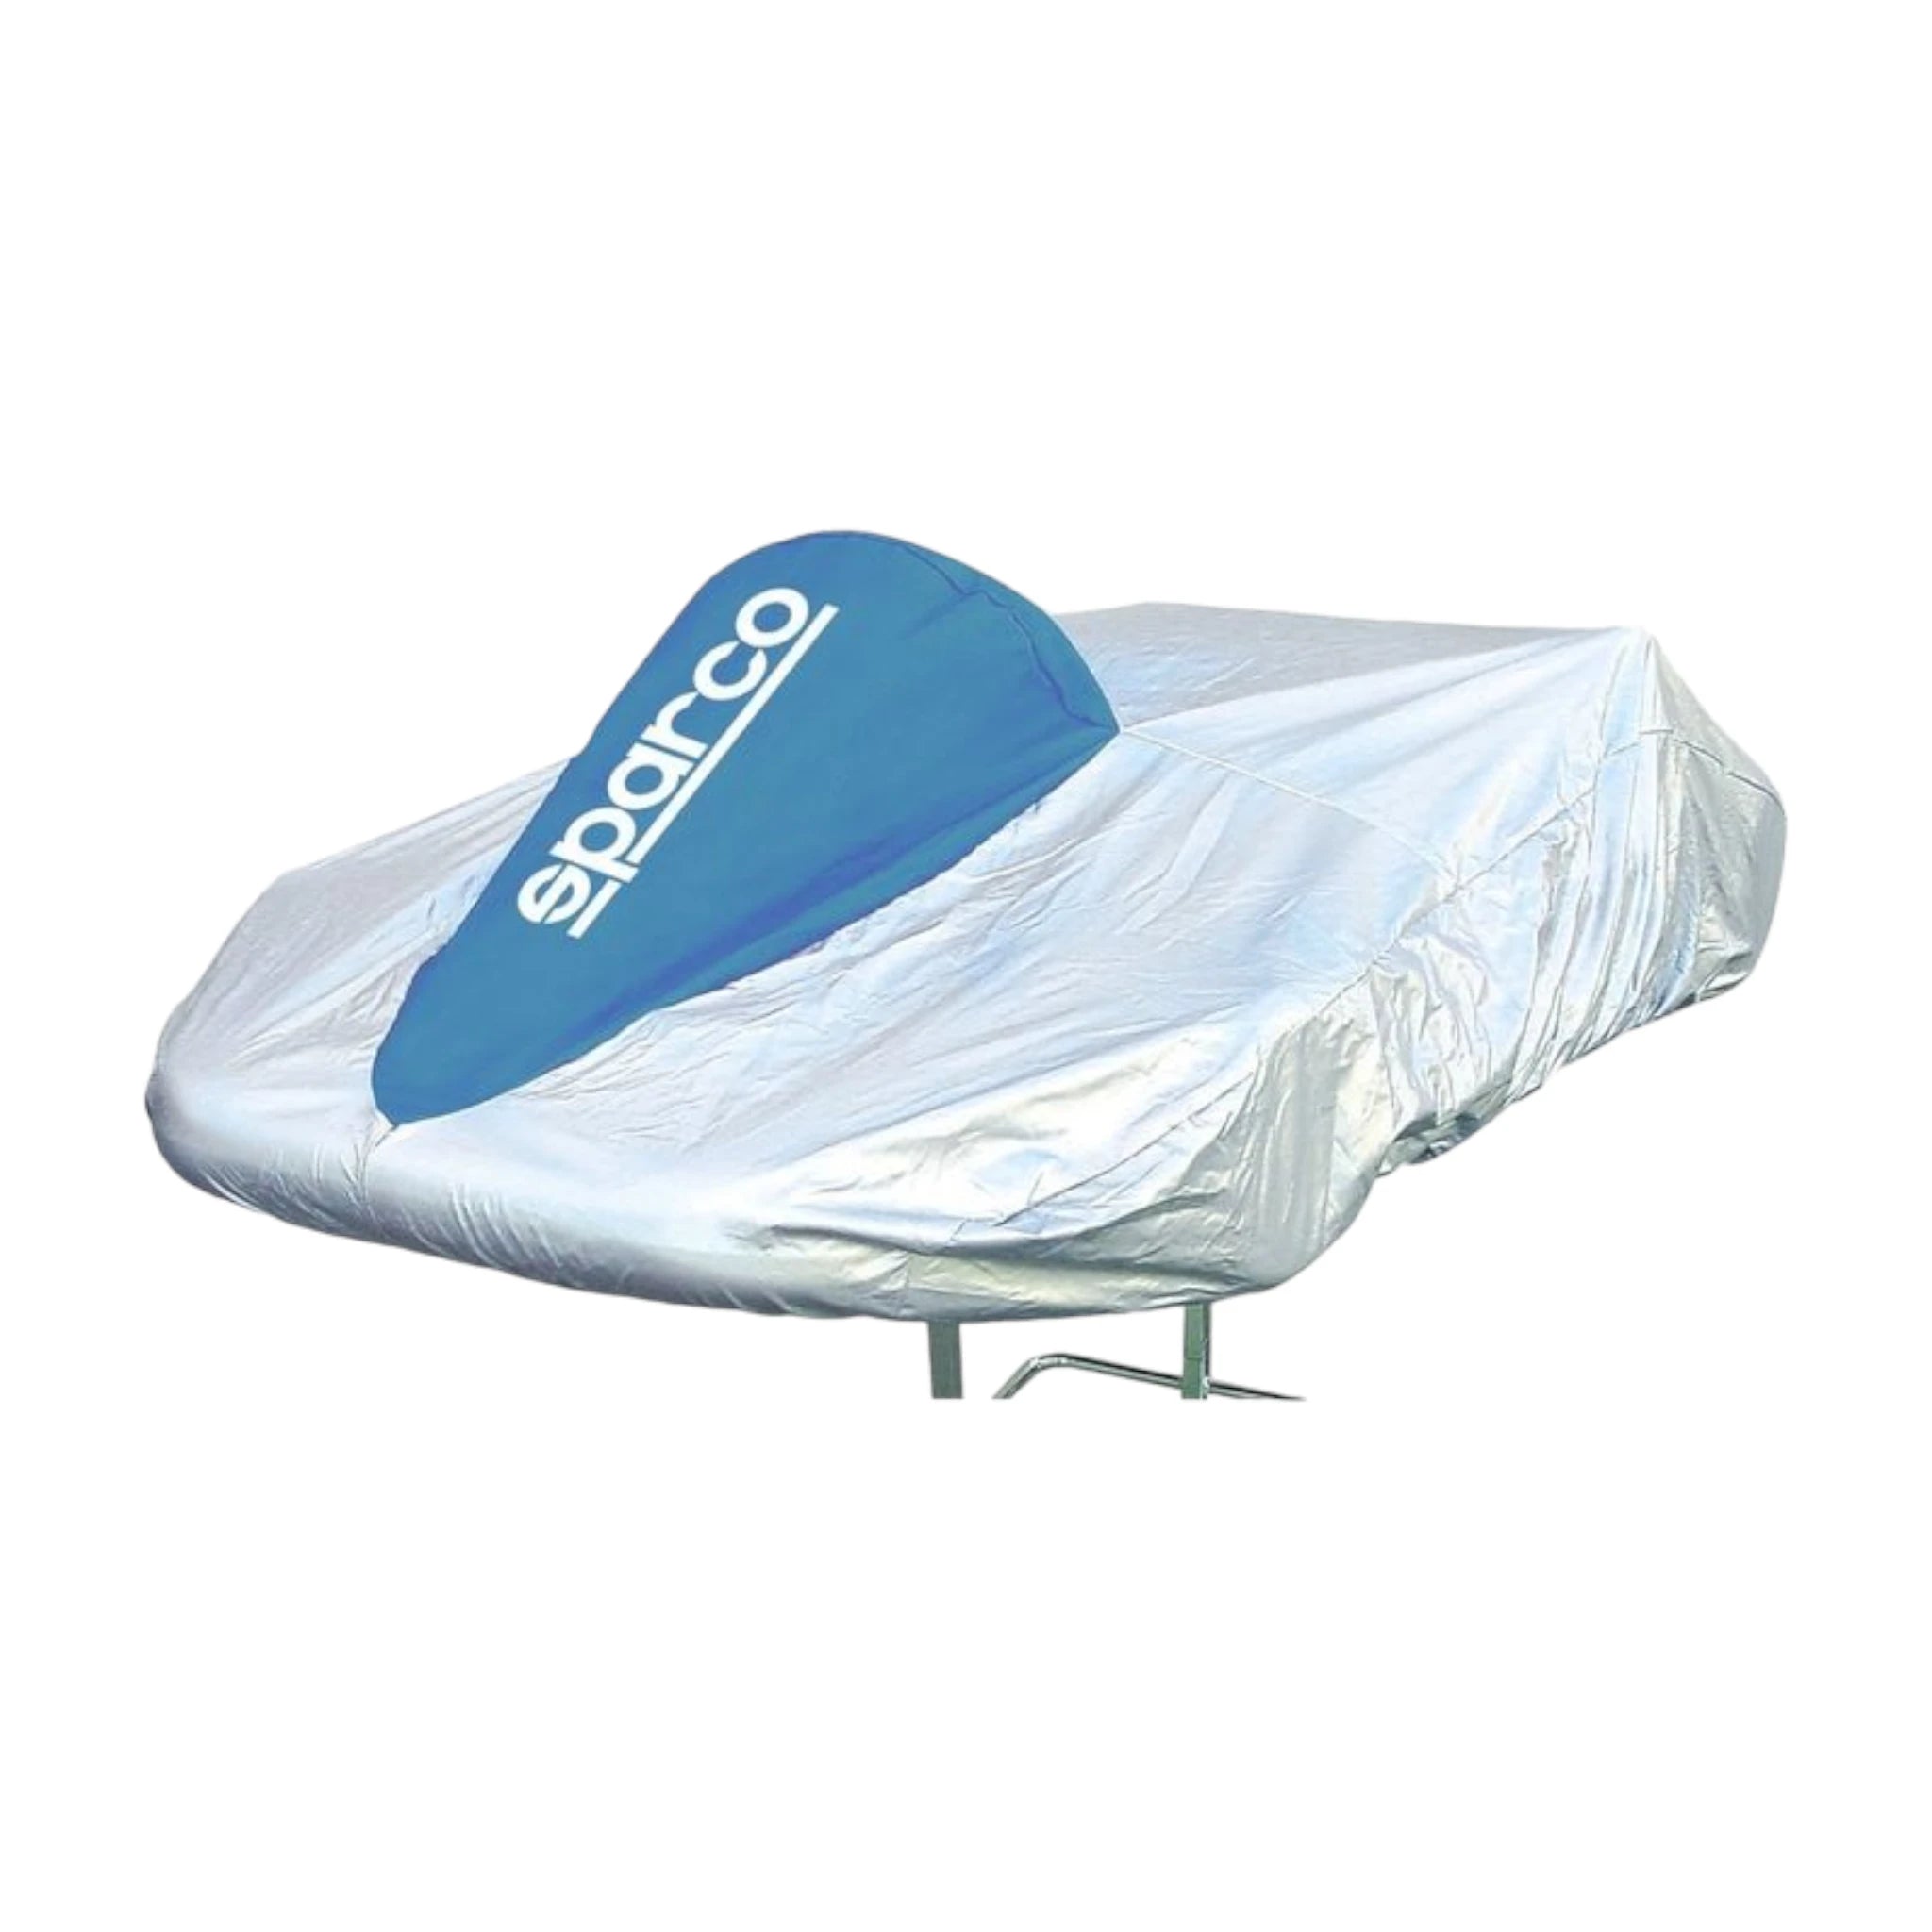 SPARCO GO KART COVER